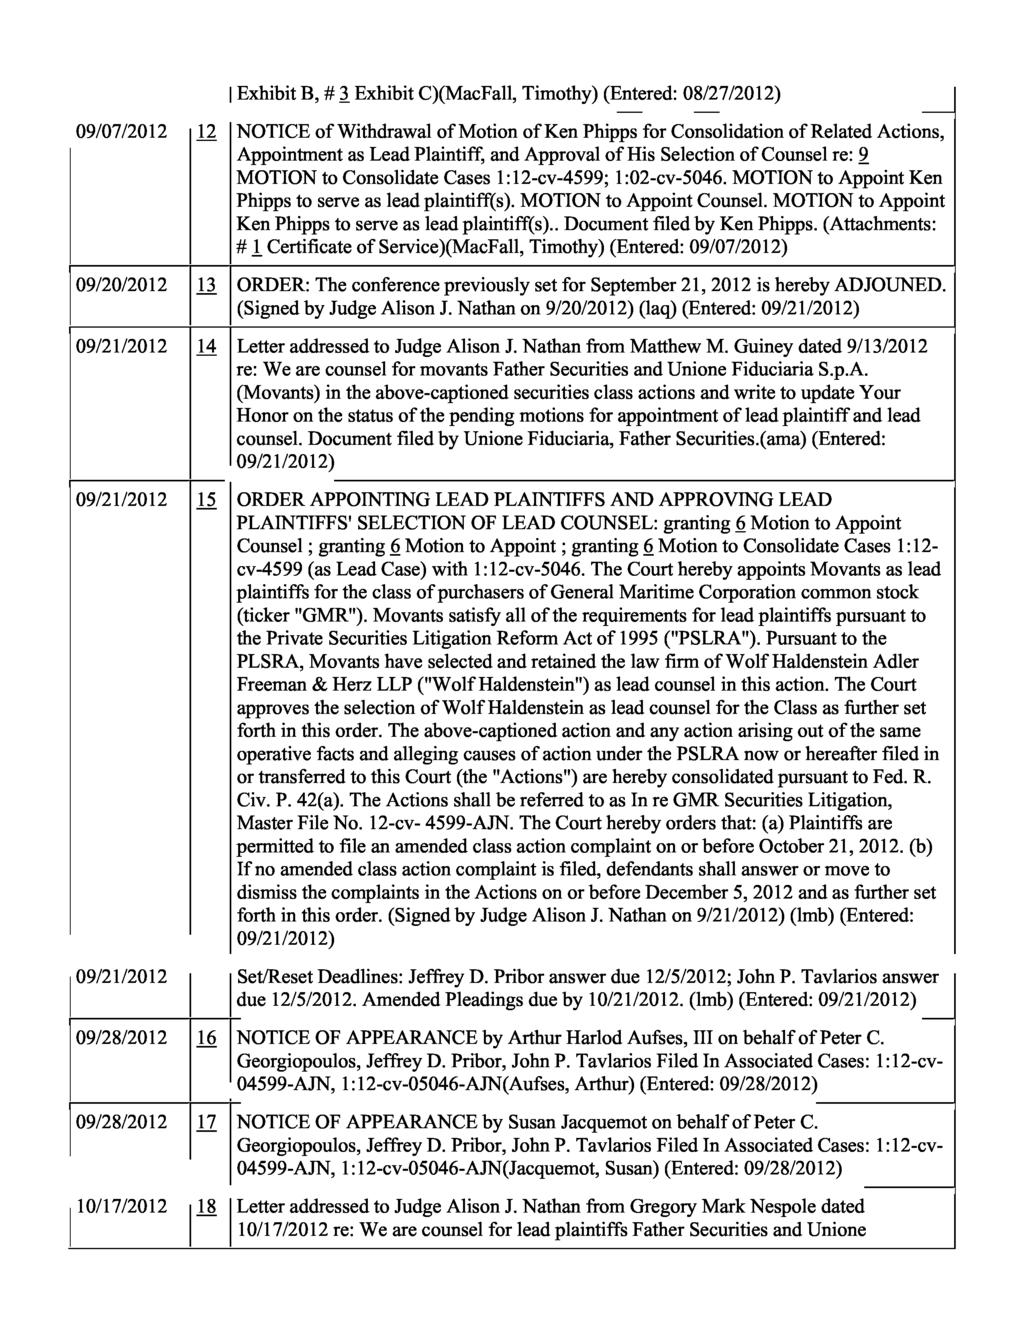 I Exhibit B, # 3 Exhibit C)(MacFall, Timothy) (Entered: 08/27/2012) 09/07/2012 12 NOTICE of Withdrawal of Motion of Ken Phipps for Consolidation of Related Actions, Appointment as Lead Plaintiff, and